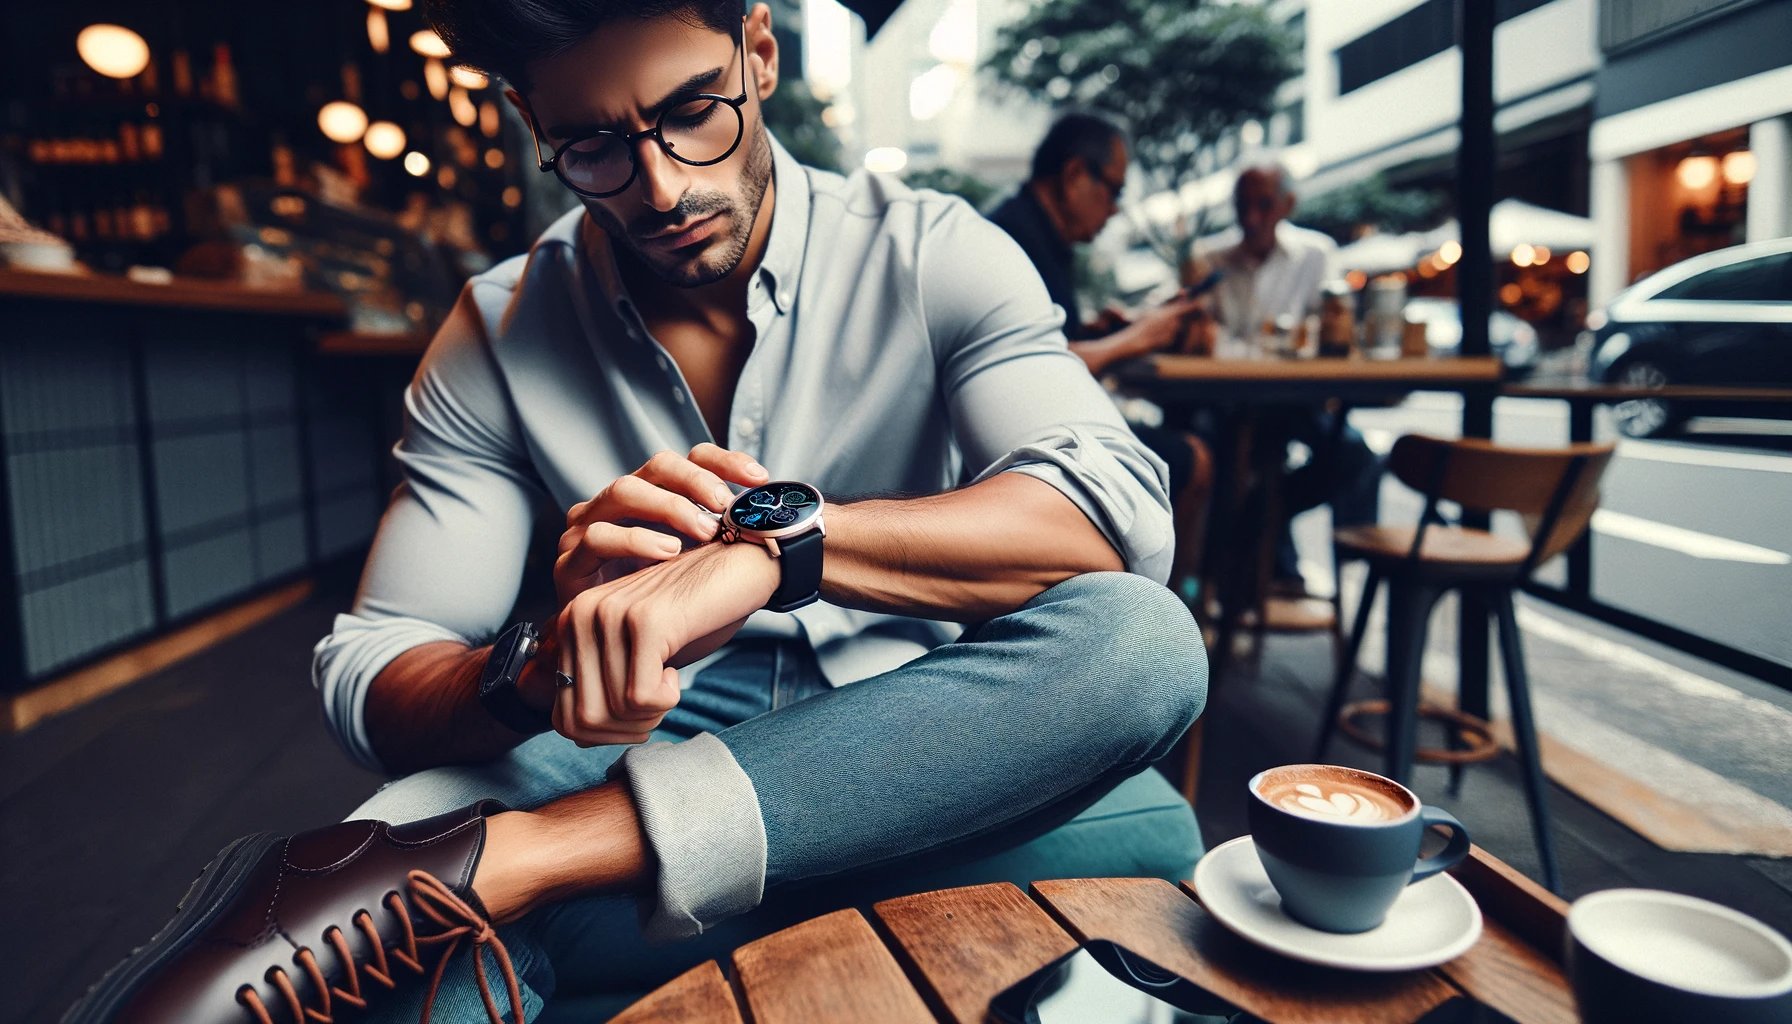 using a trendy smartwatch while casually sitting at a café